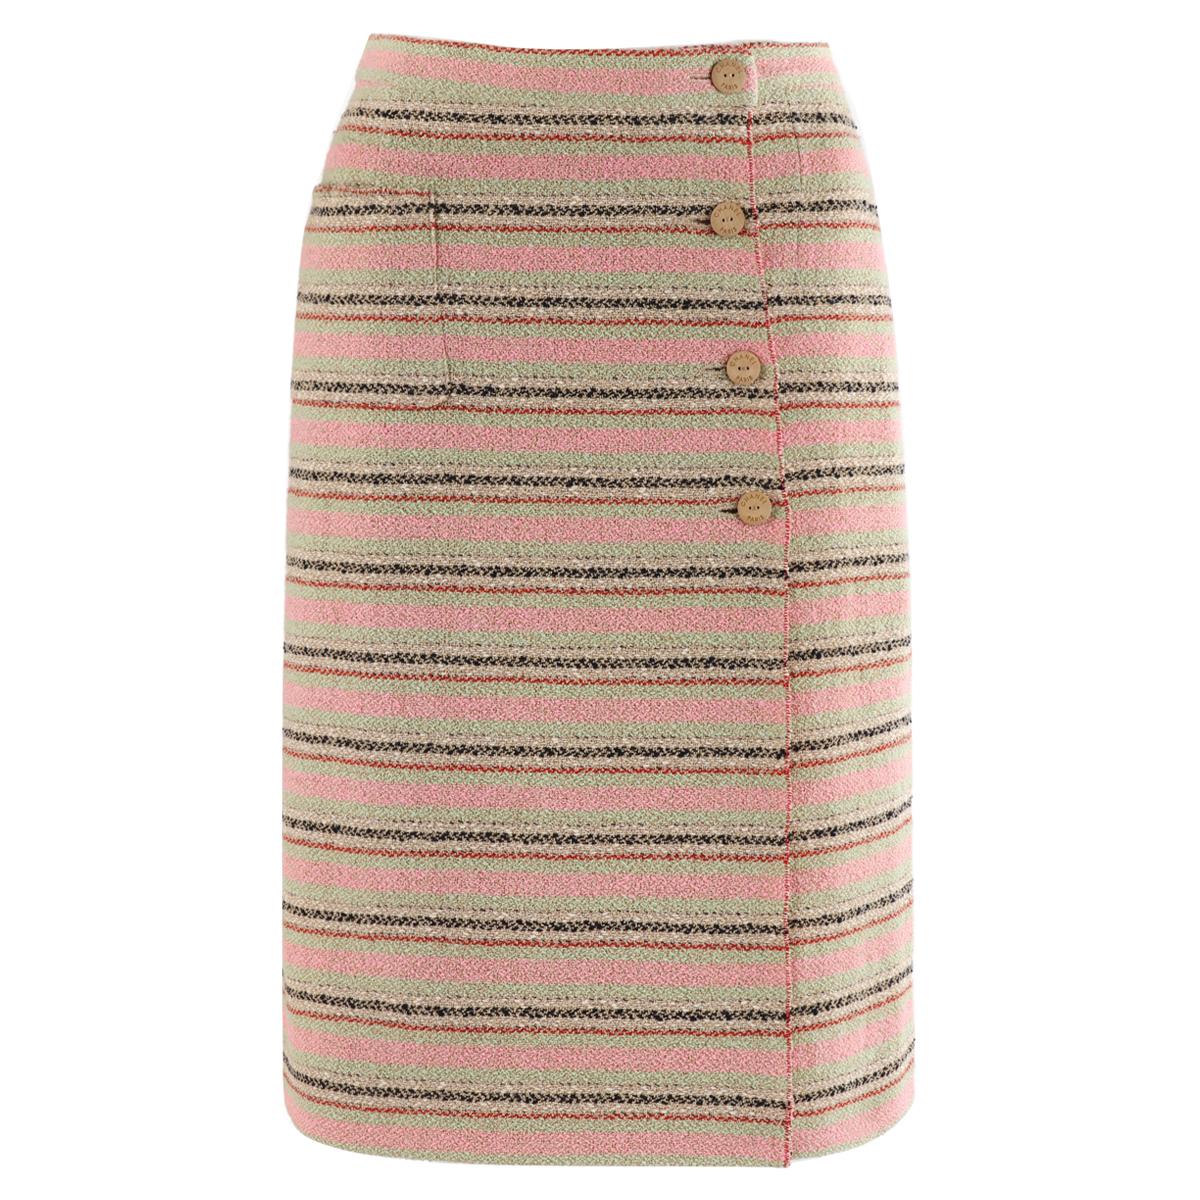 CHANEL Cruise Collection 2000 Multi-Color Stripe Wrap Button Up Skirt 